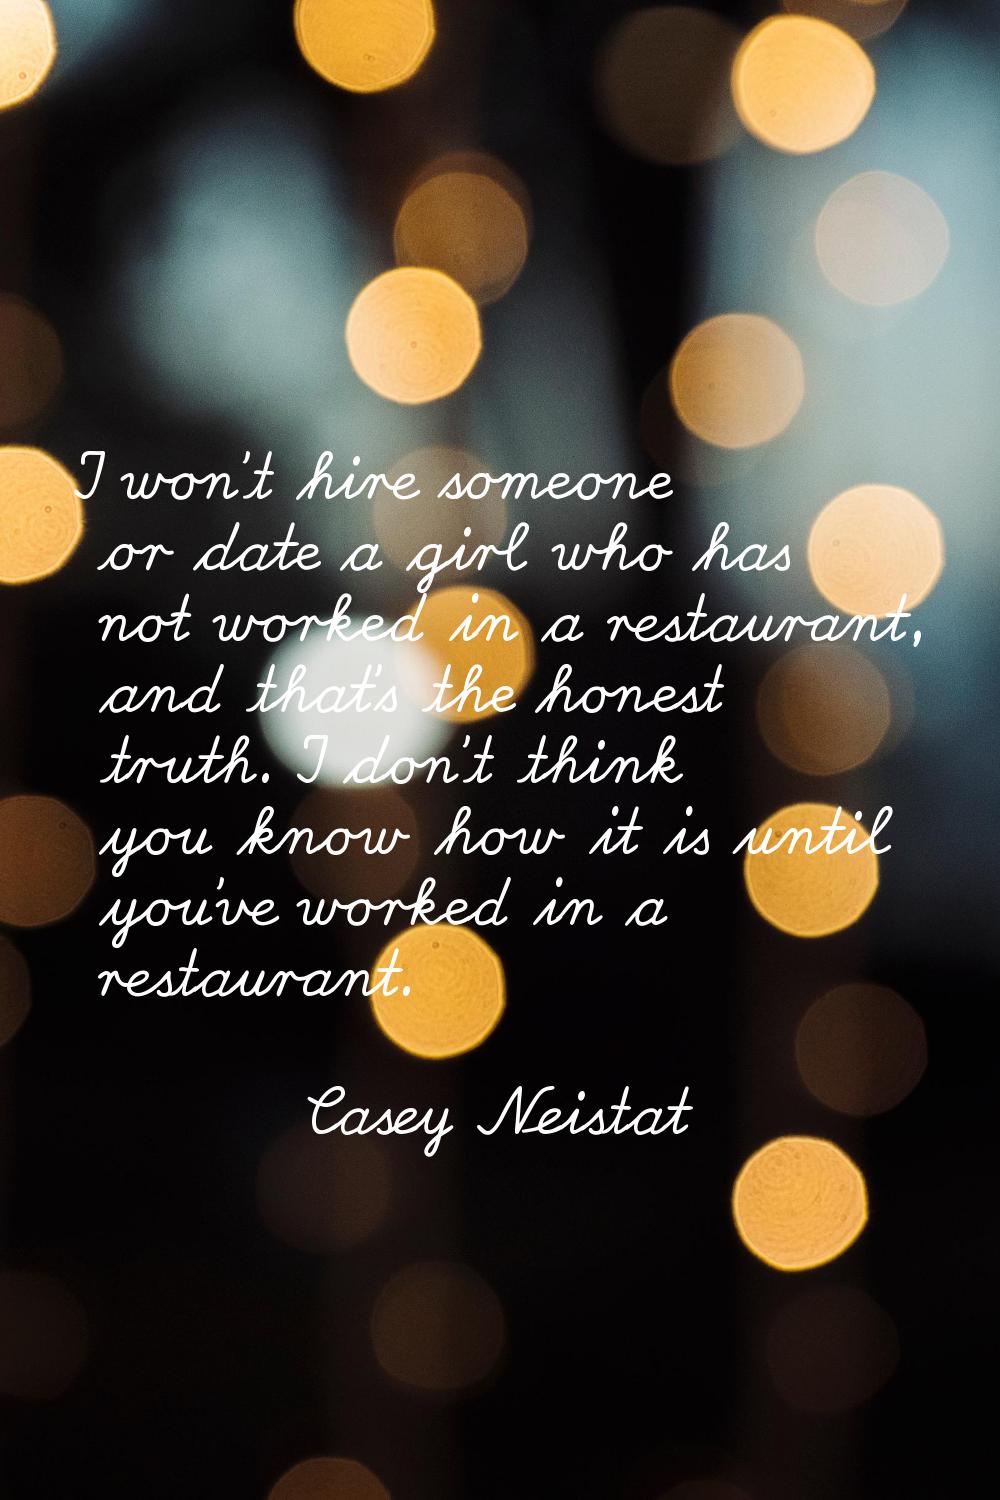 I won't hire someone or date a girl who has not worked in a restaurant, and that's the honest truth